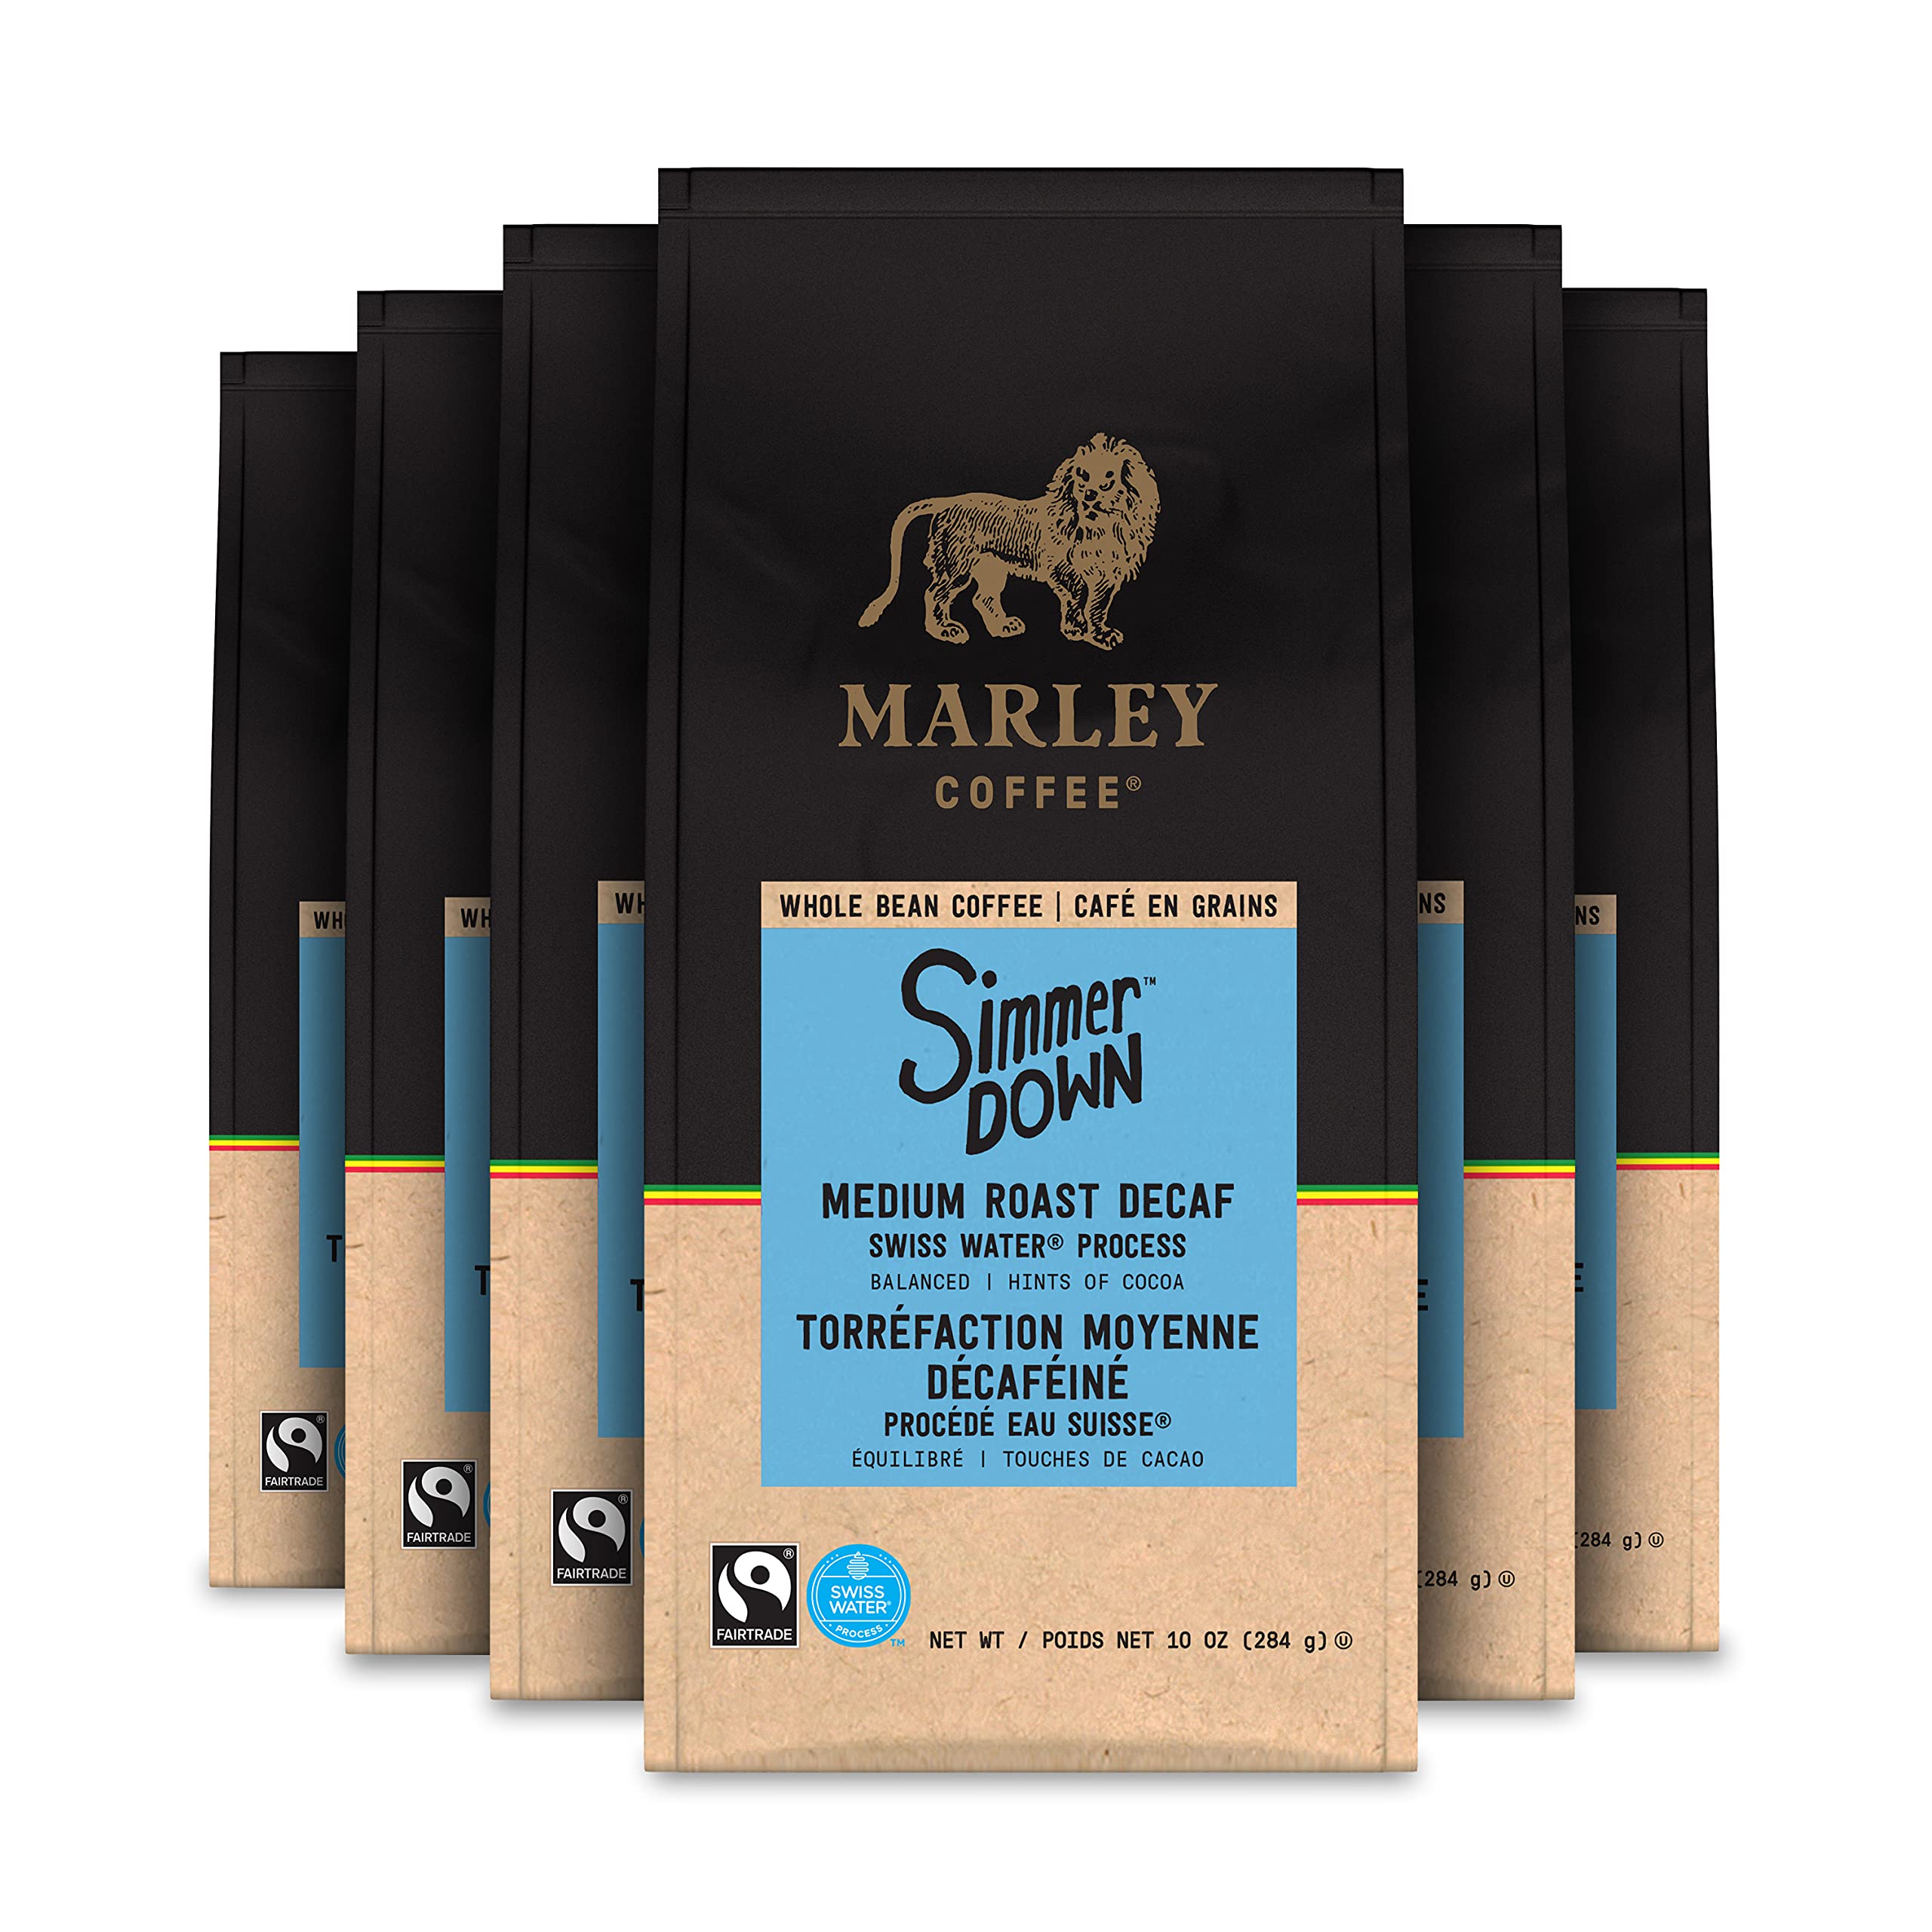 Marley Coffee Simmer Down Decaf, Swiss Water Process, Medium Roast, Whole Bean Coffee, 10 Ounce (Pack of 6)